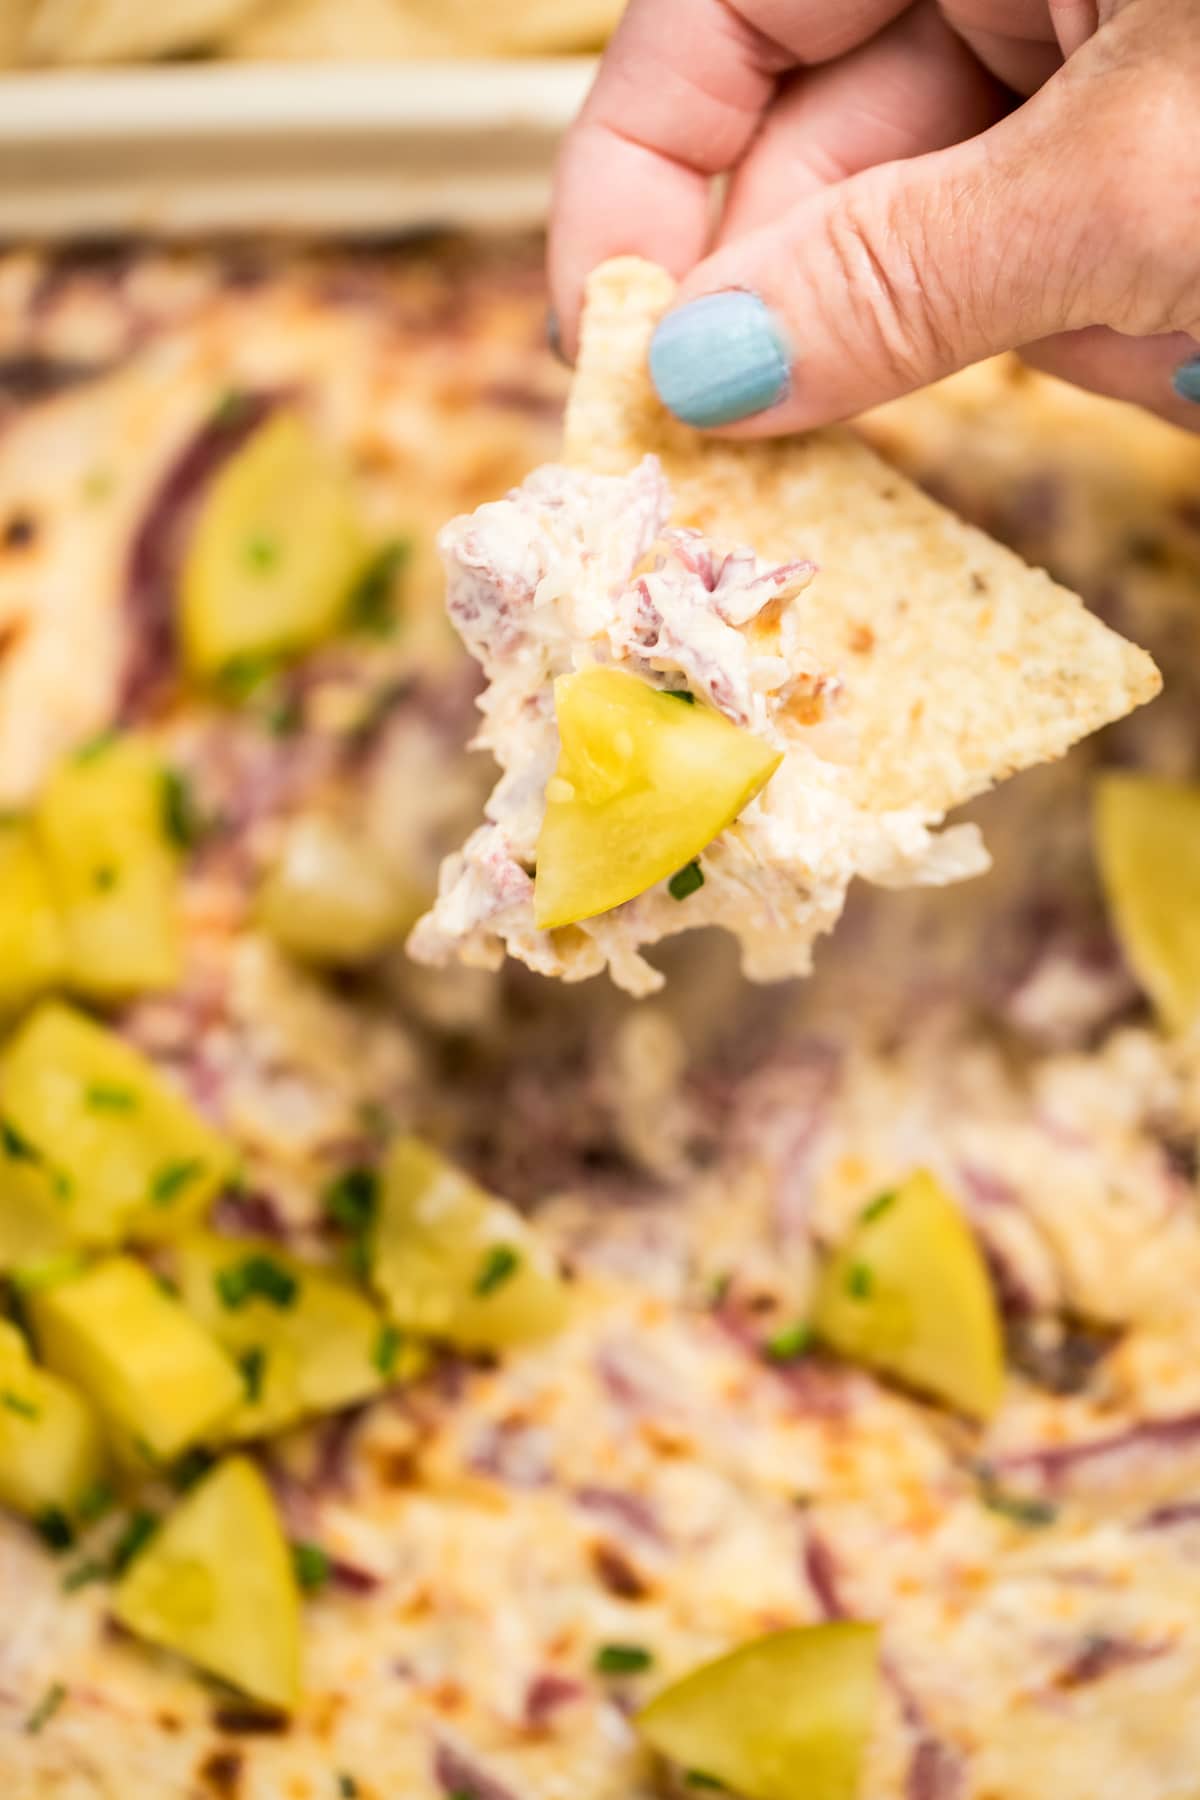 A hand holding a tortilla chip with reuben dip and a pickle on it, over a dish of reuben dip topped with pickles.